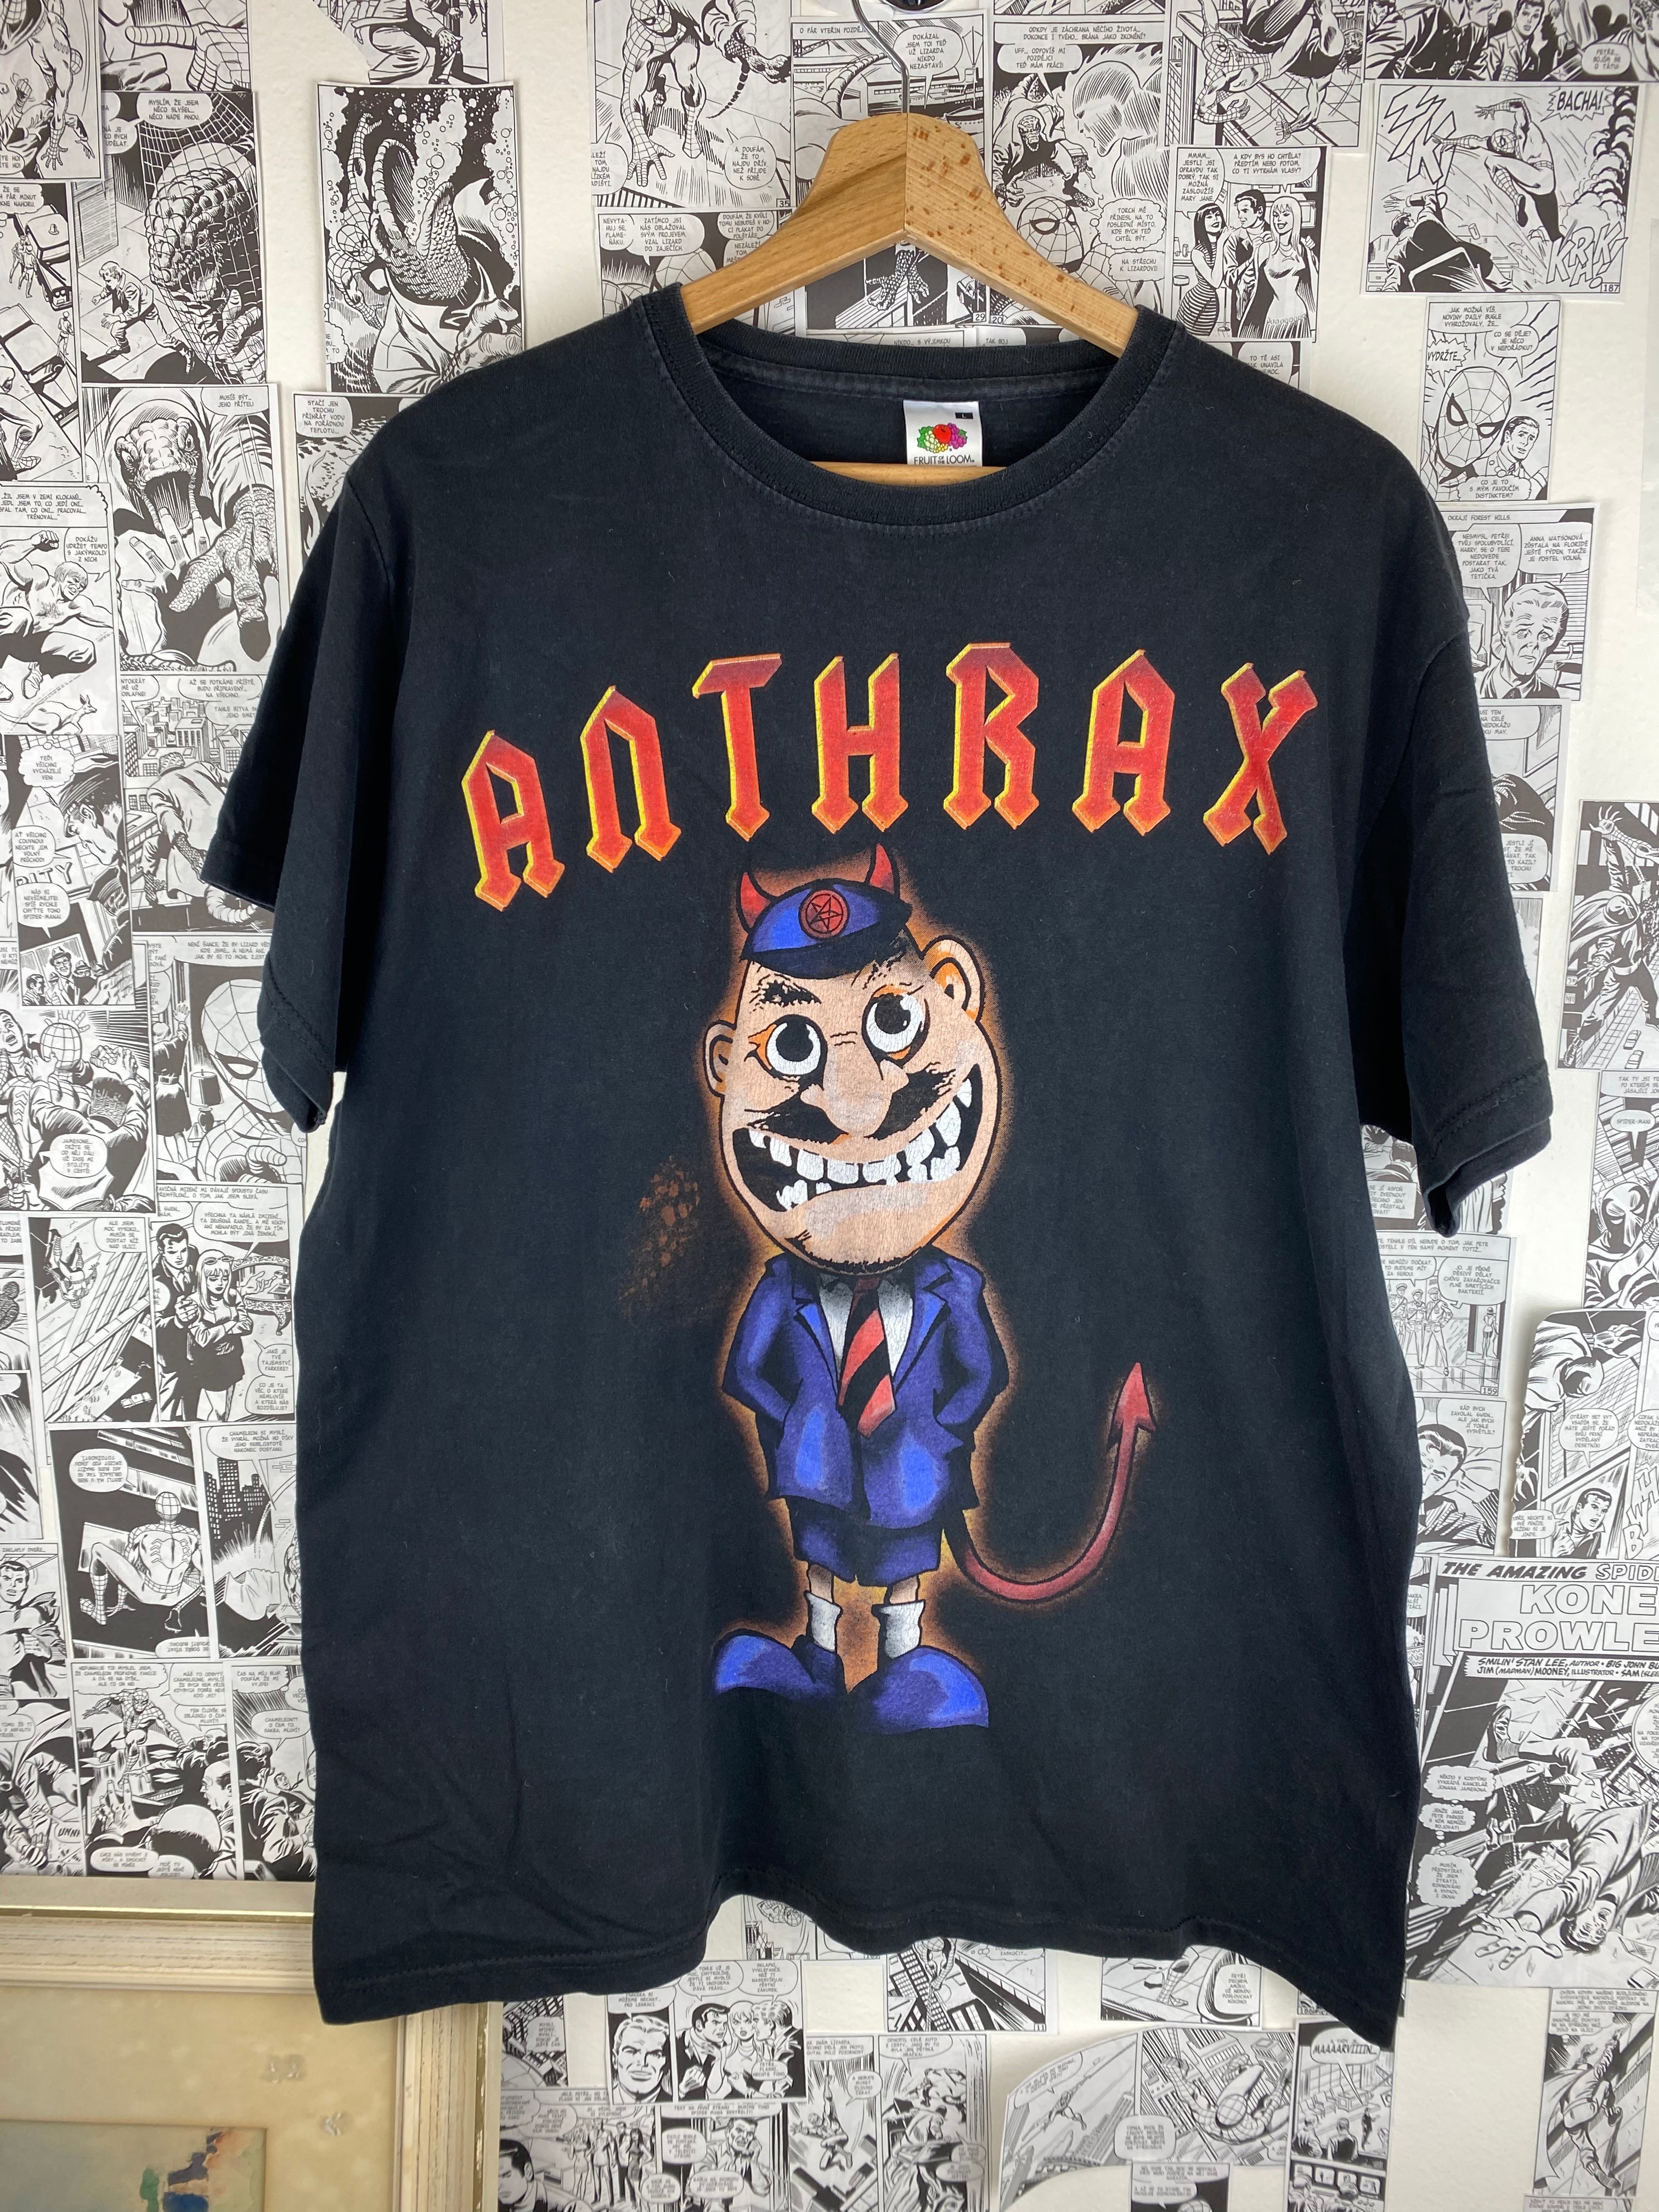 Vintage Anthrax - Anthems 00s t-shirt - size L